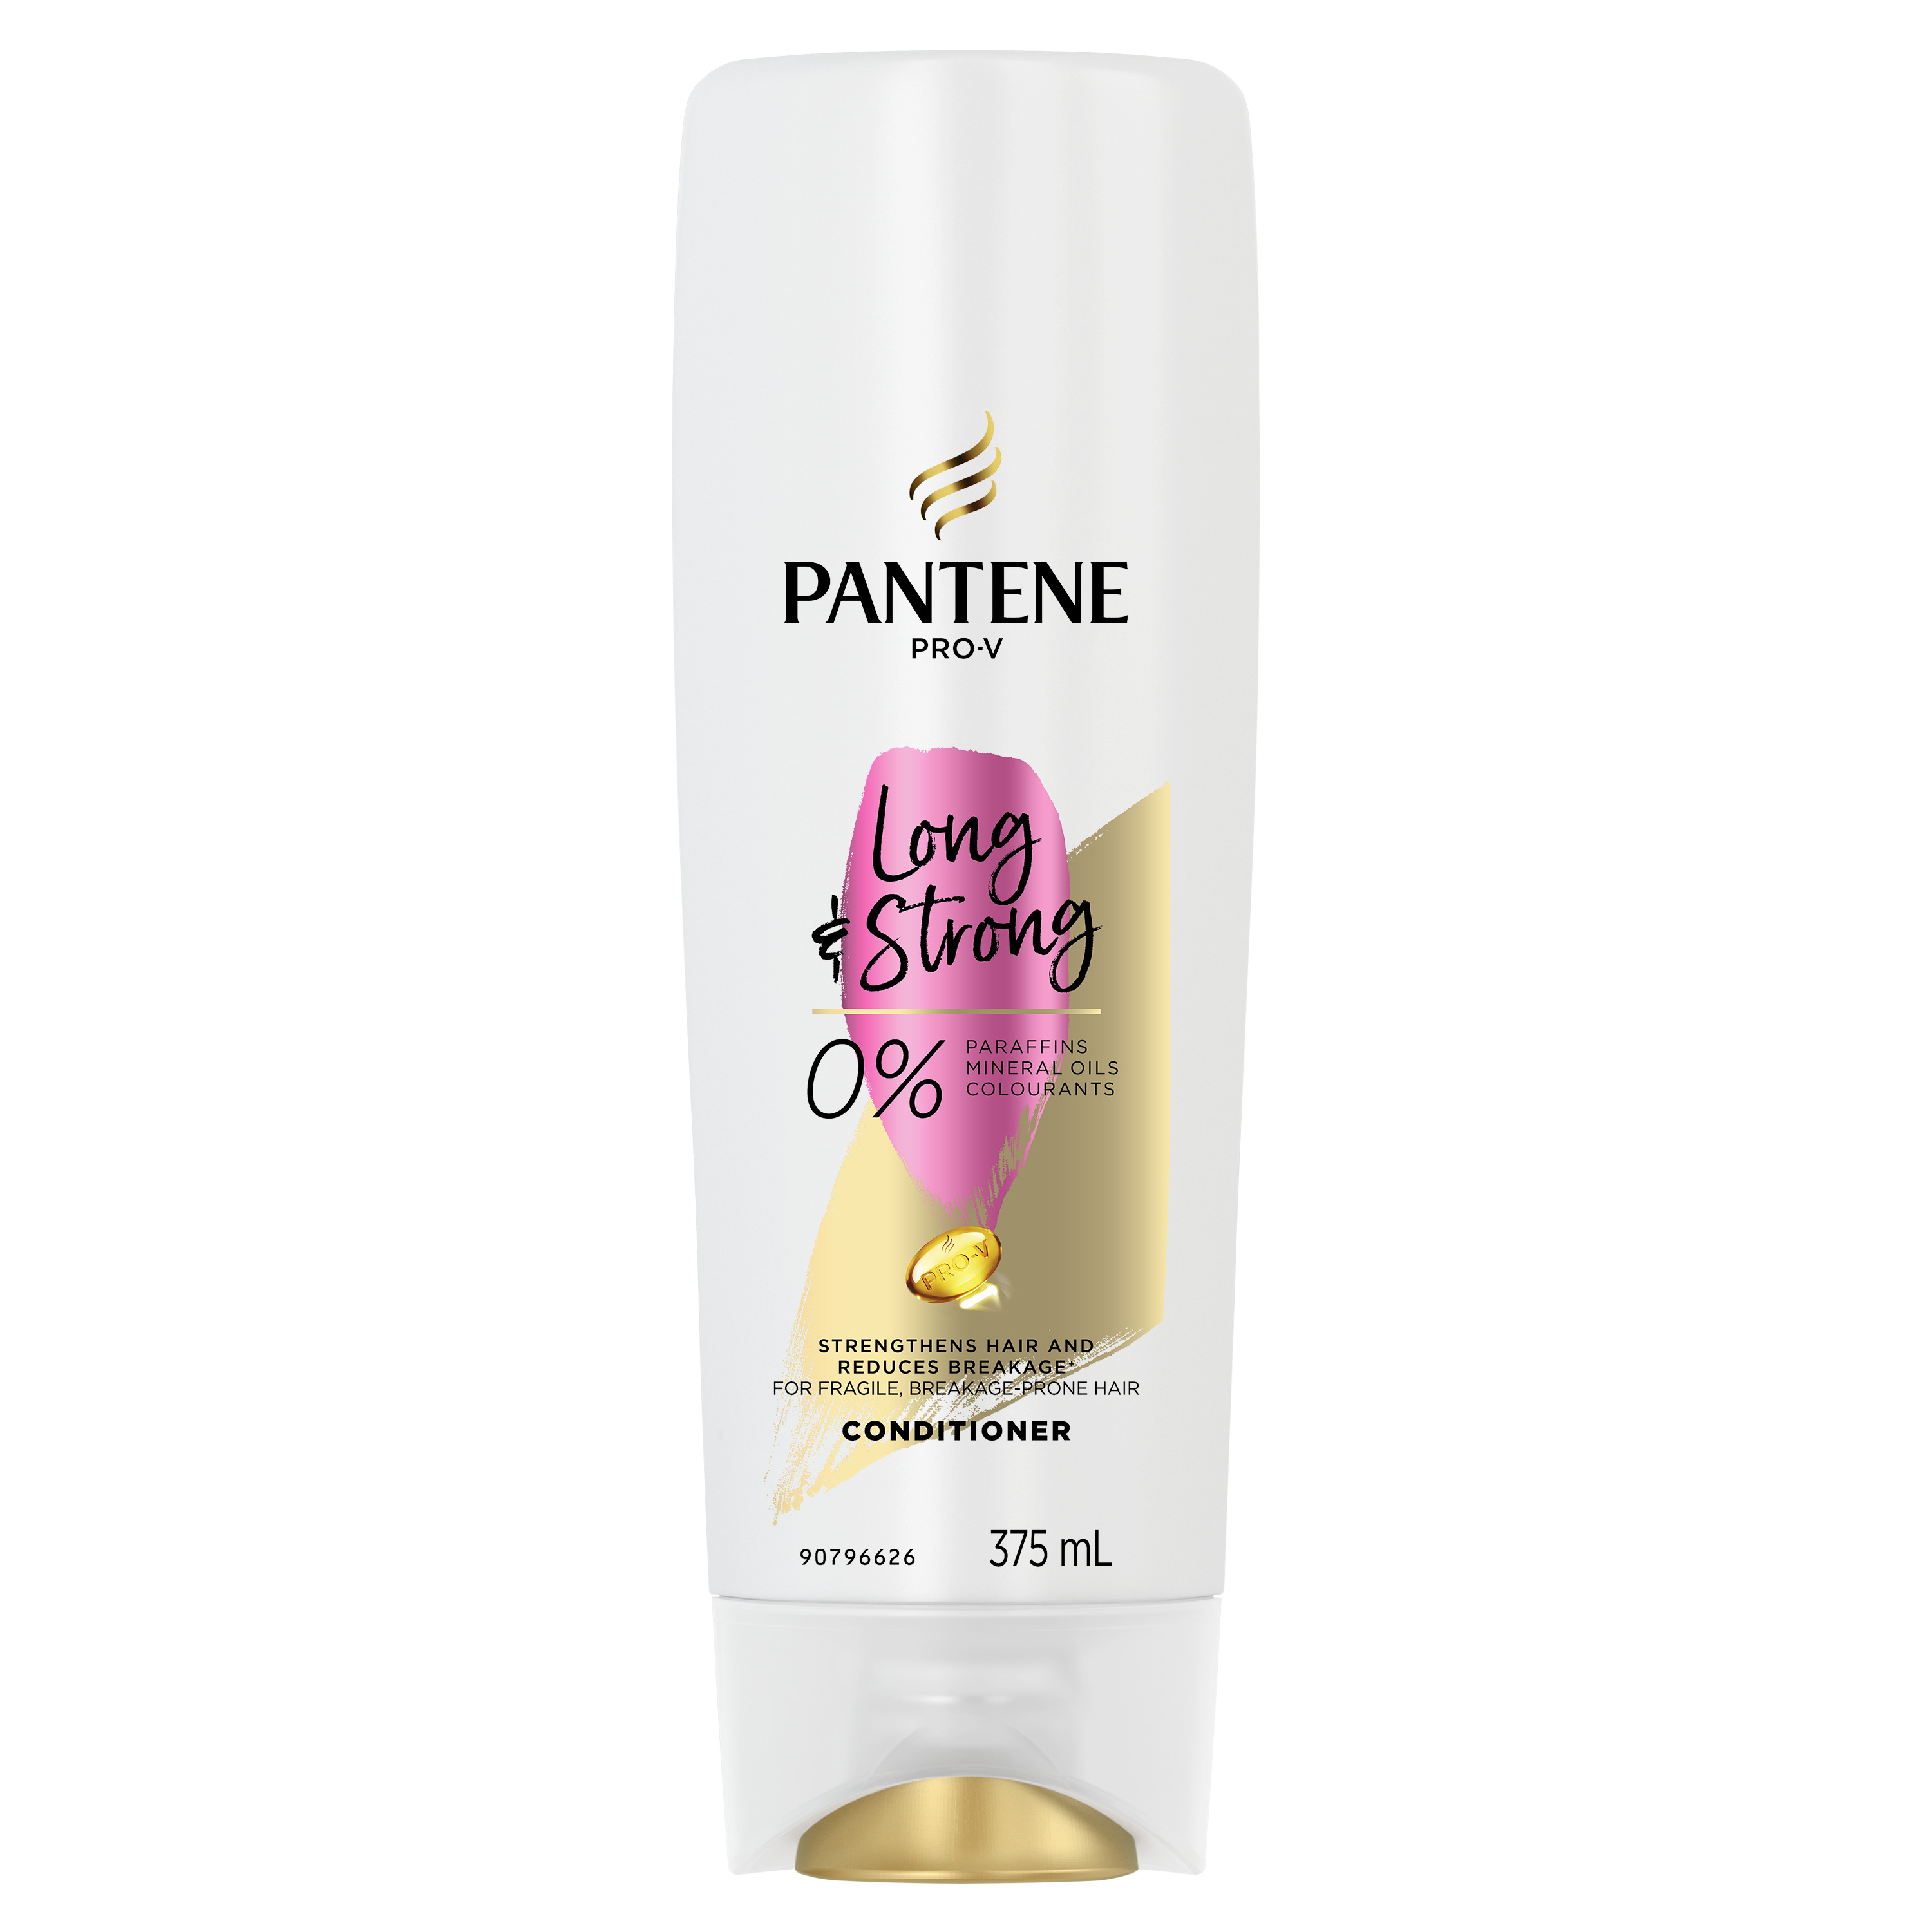 LONG & STRONG CONDITIONER